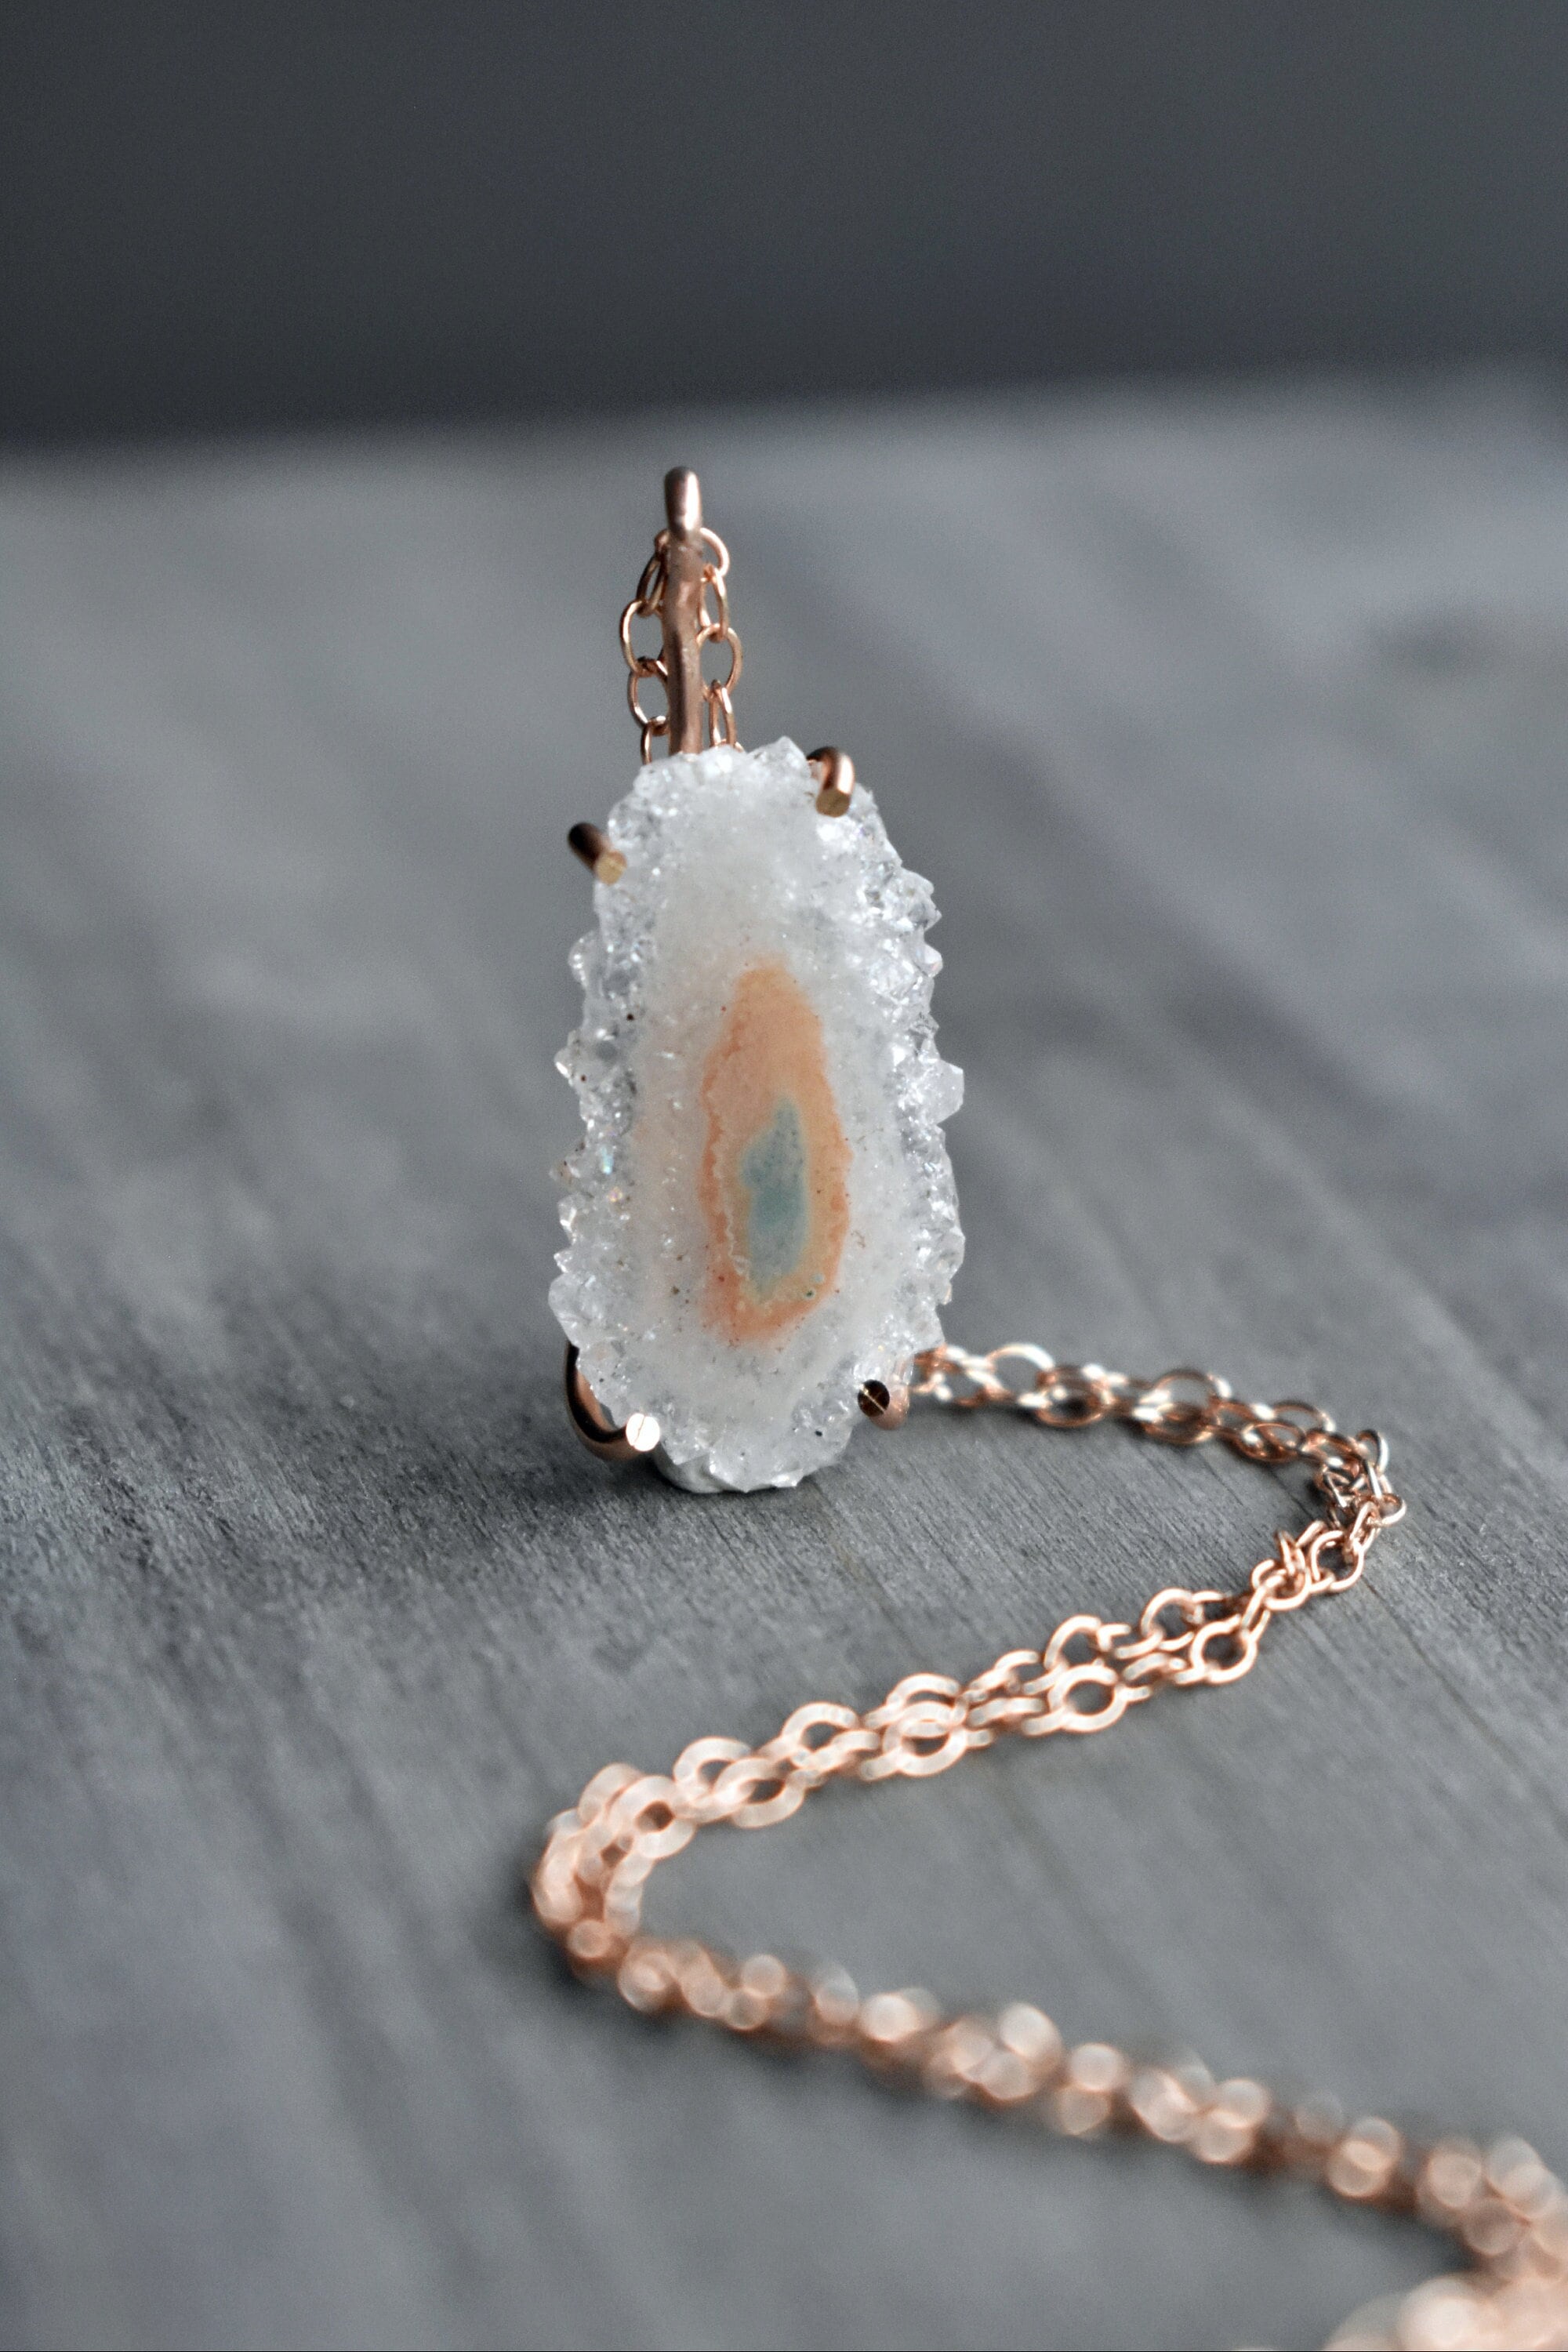 Quartz Crystal Drop Pendant Necklace in Rose Gold*, White Pink Turquoise Crystal, Meditation Crystal Slice Pendant for a Mothers Day Gift